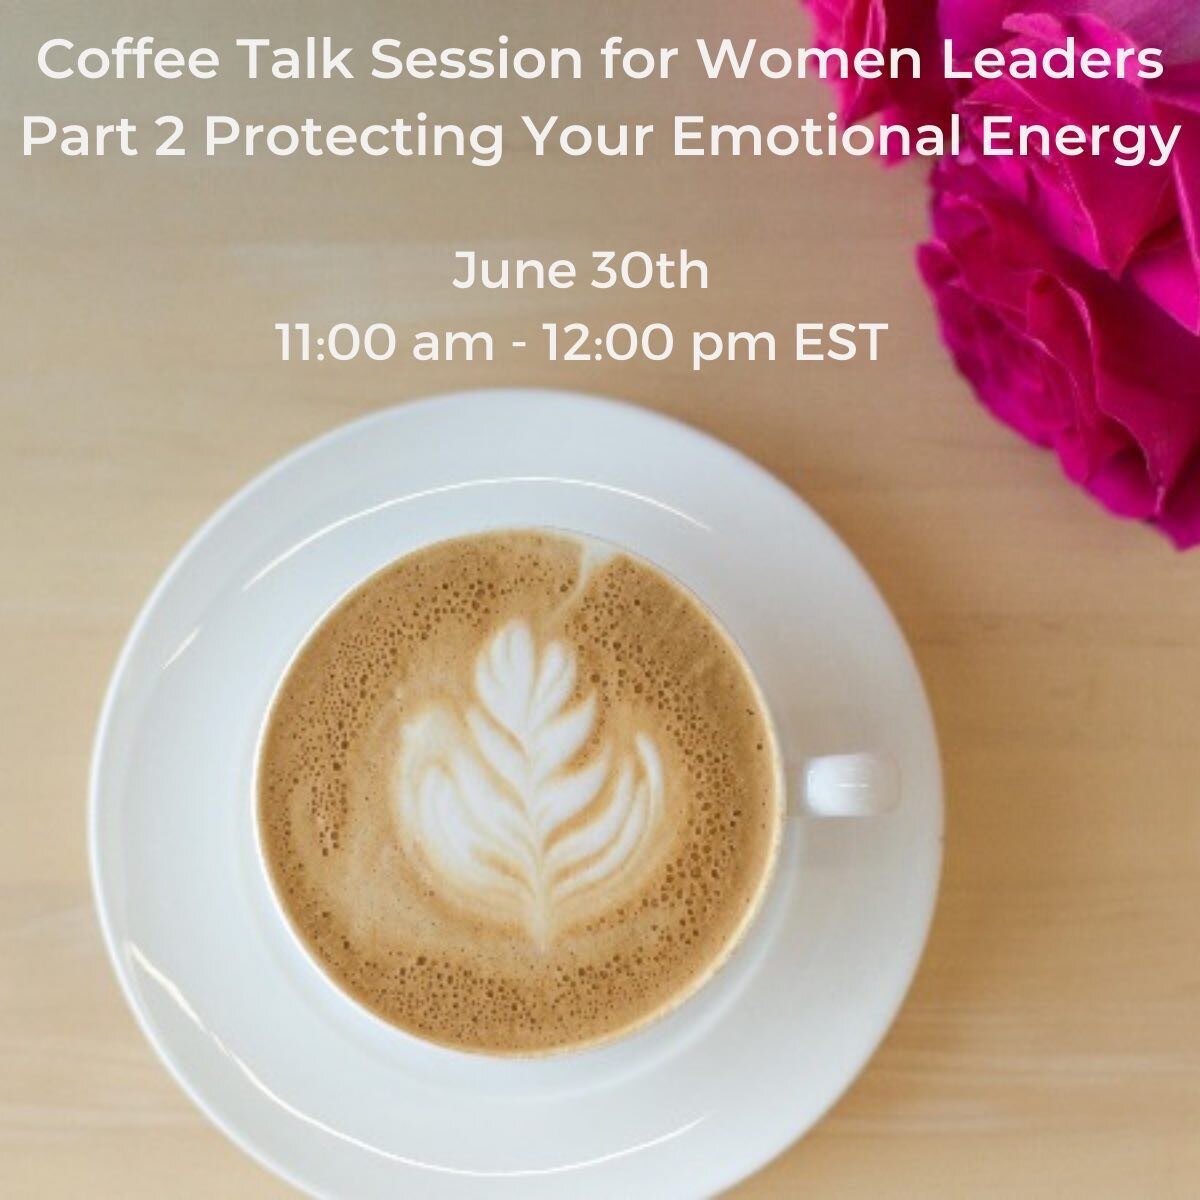 Learn to balance your needs as a women leader while leading others. Register: https://linktr.ee/angelinabeas